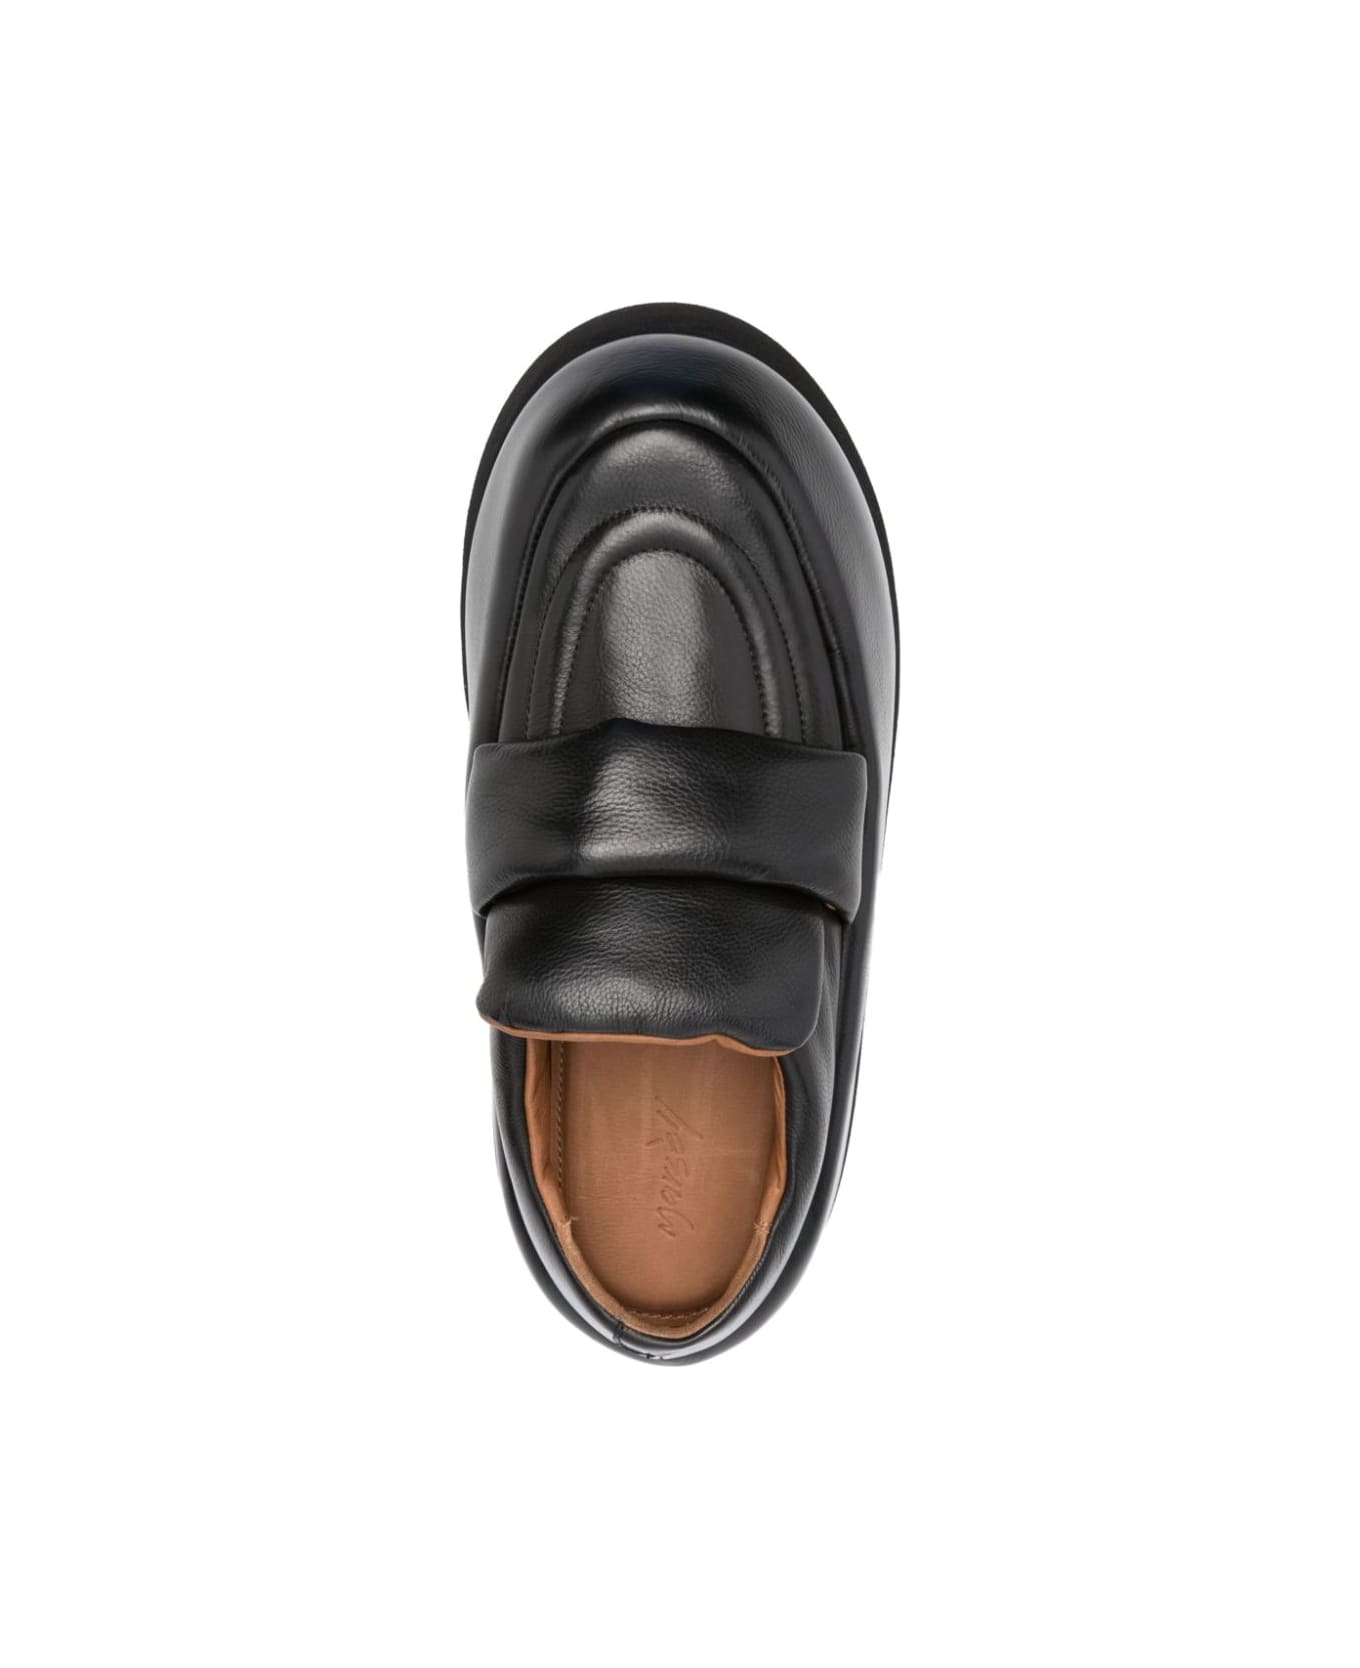 Marsell Bombo Loafers - Black